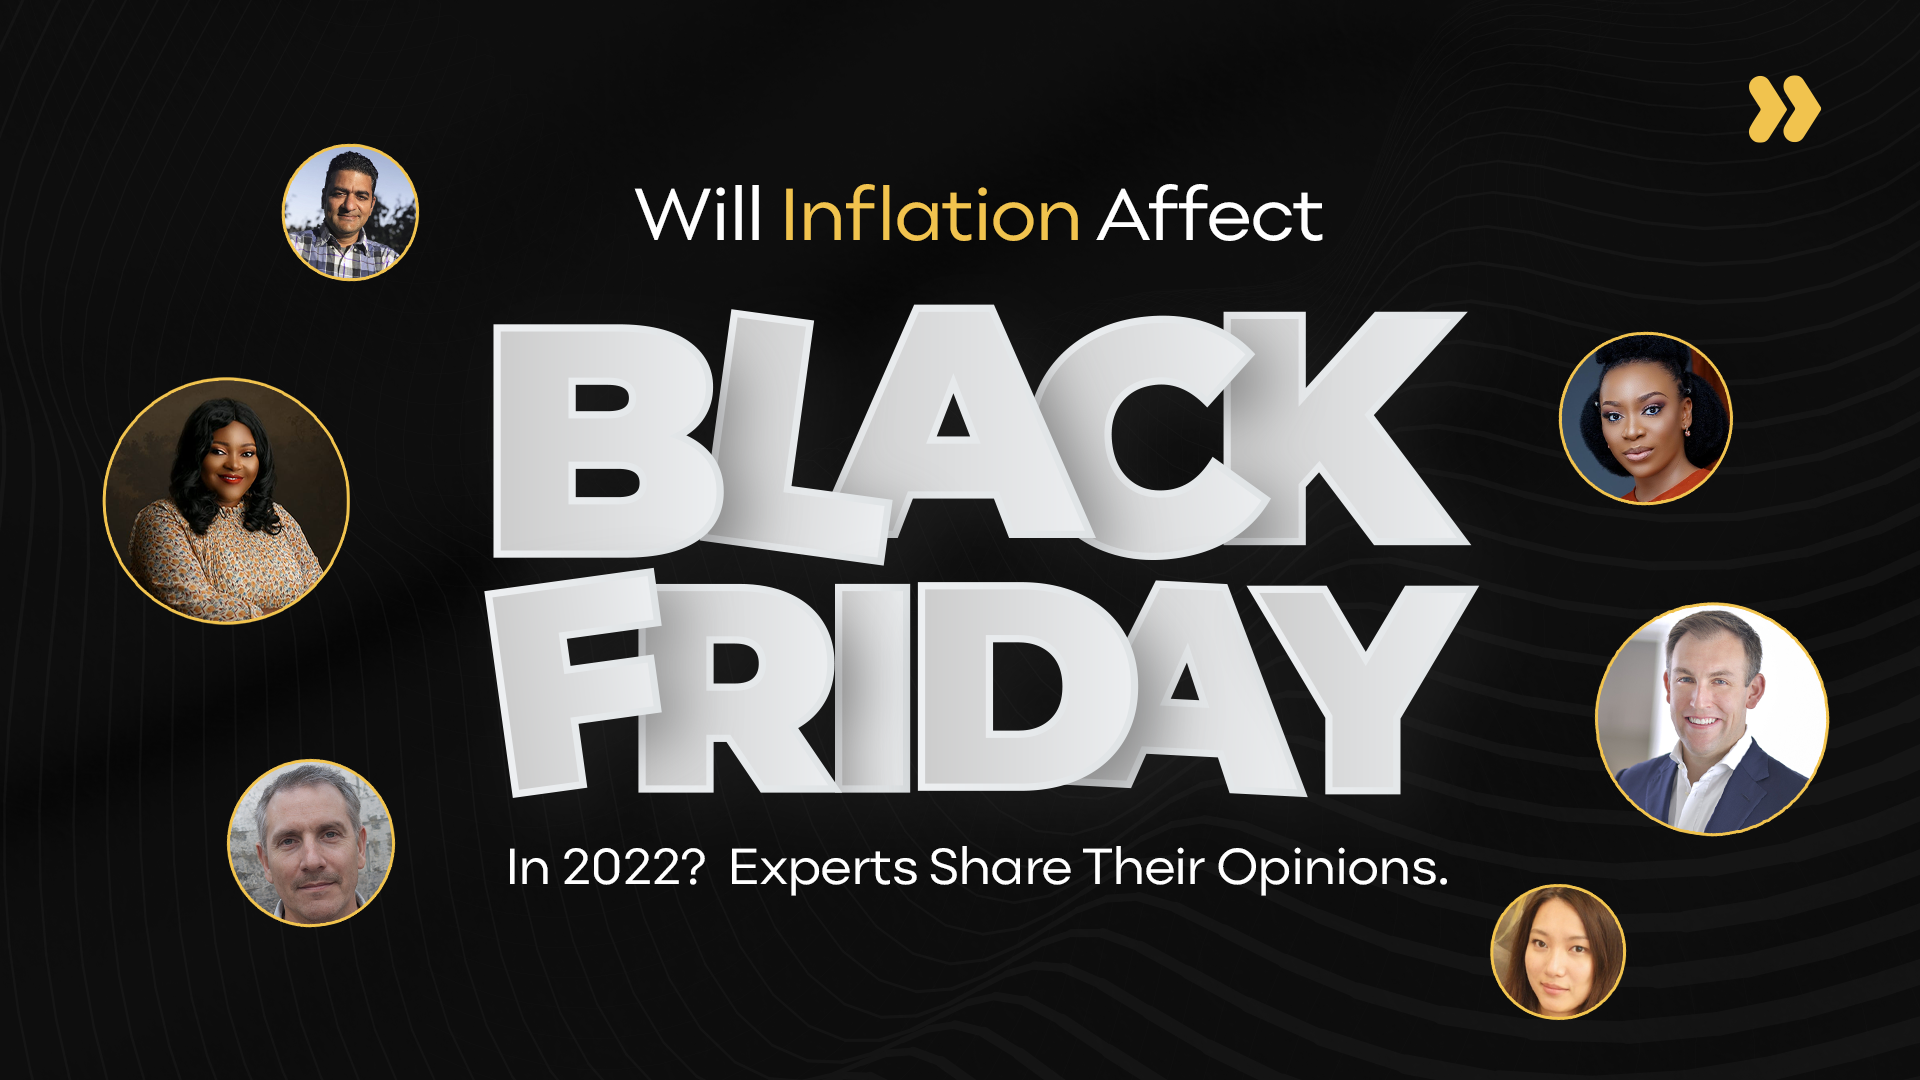 Will Inflation Affect Black Friday in 2022? Experts Share Their Opinions